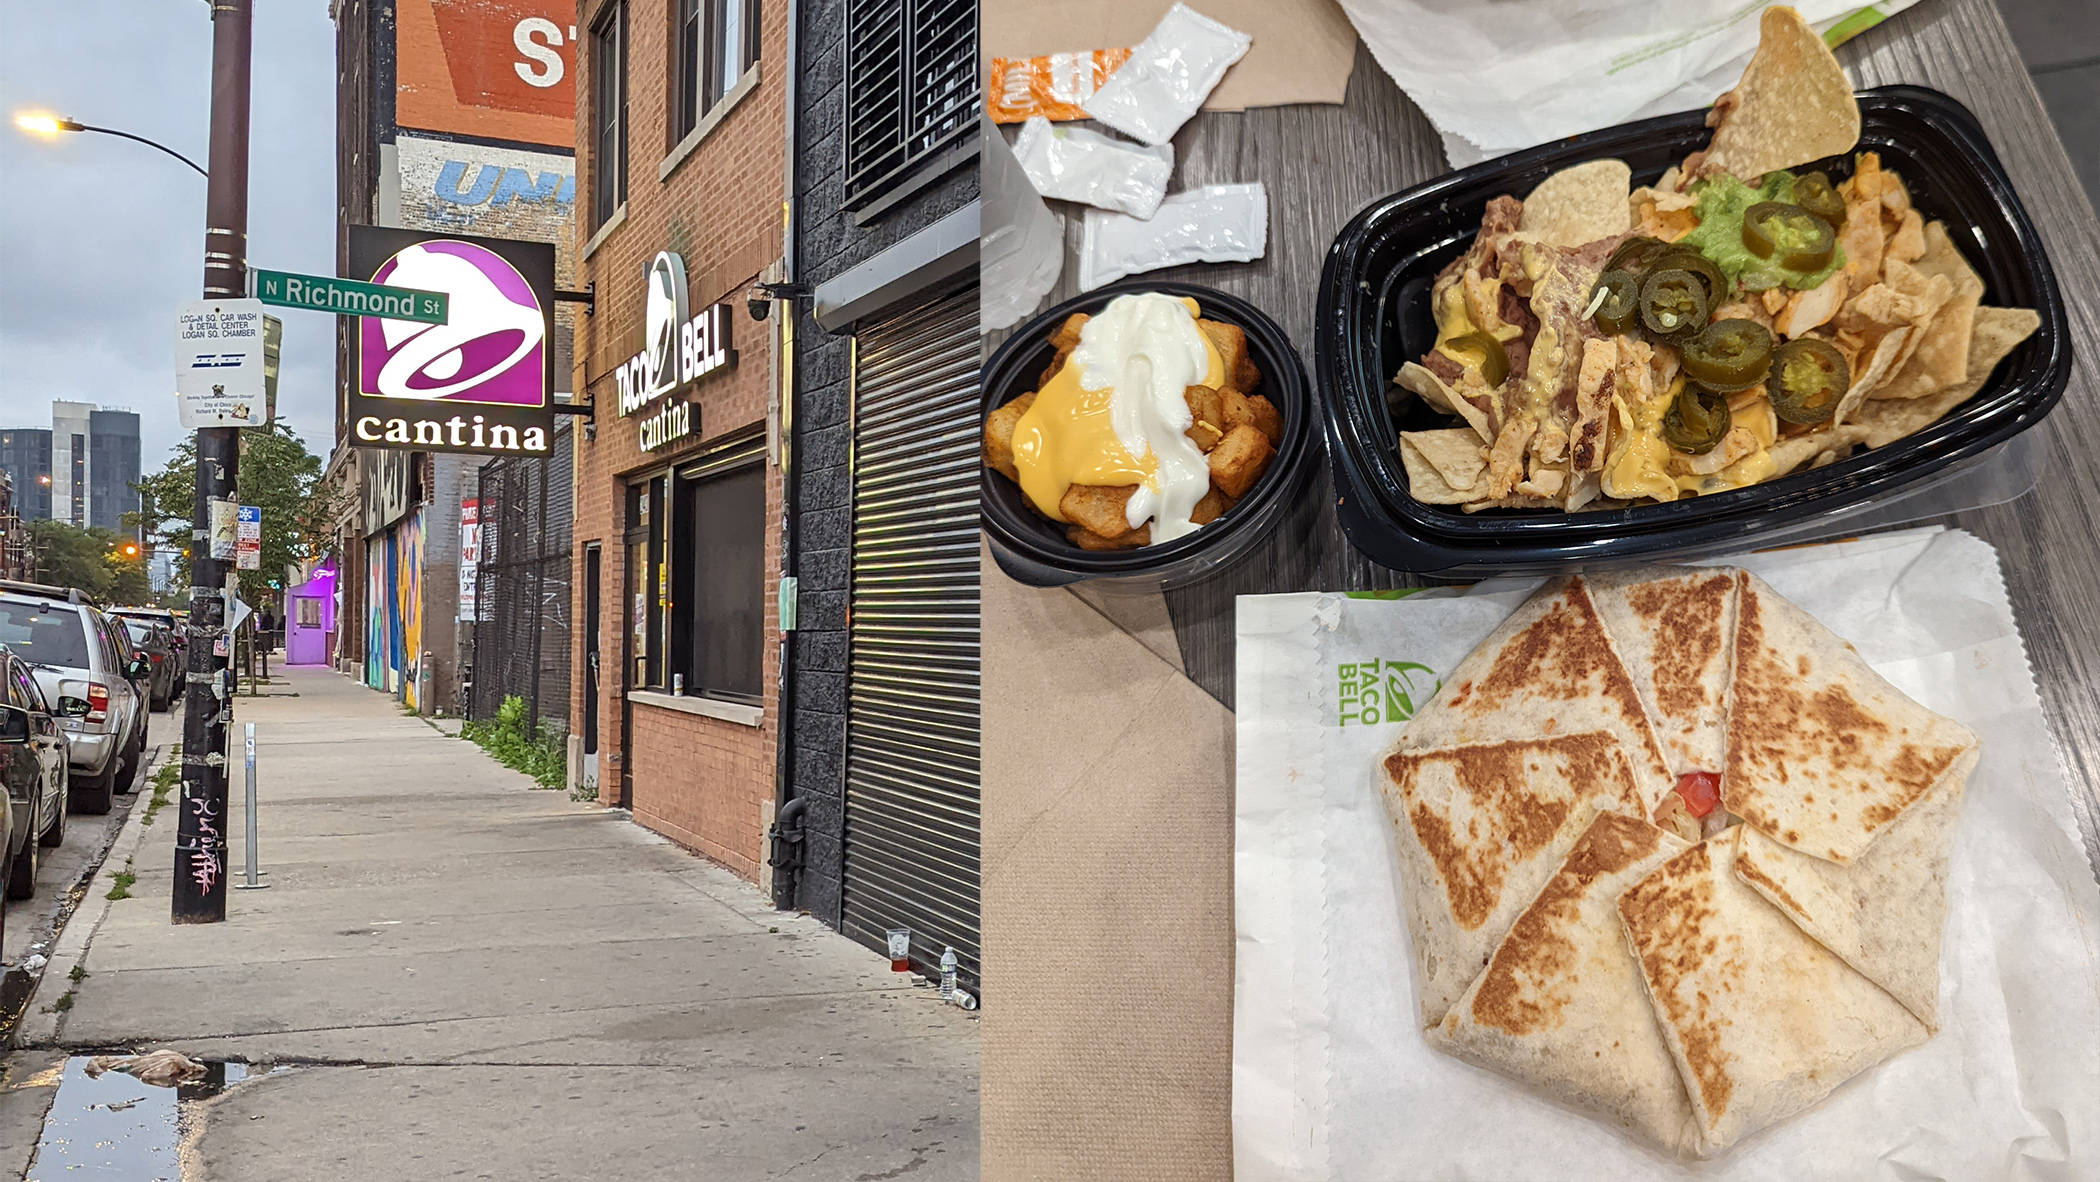 Taco Bell Cantina Storefront on left; aerial view of Taco Bell meal on right